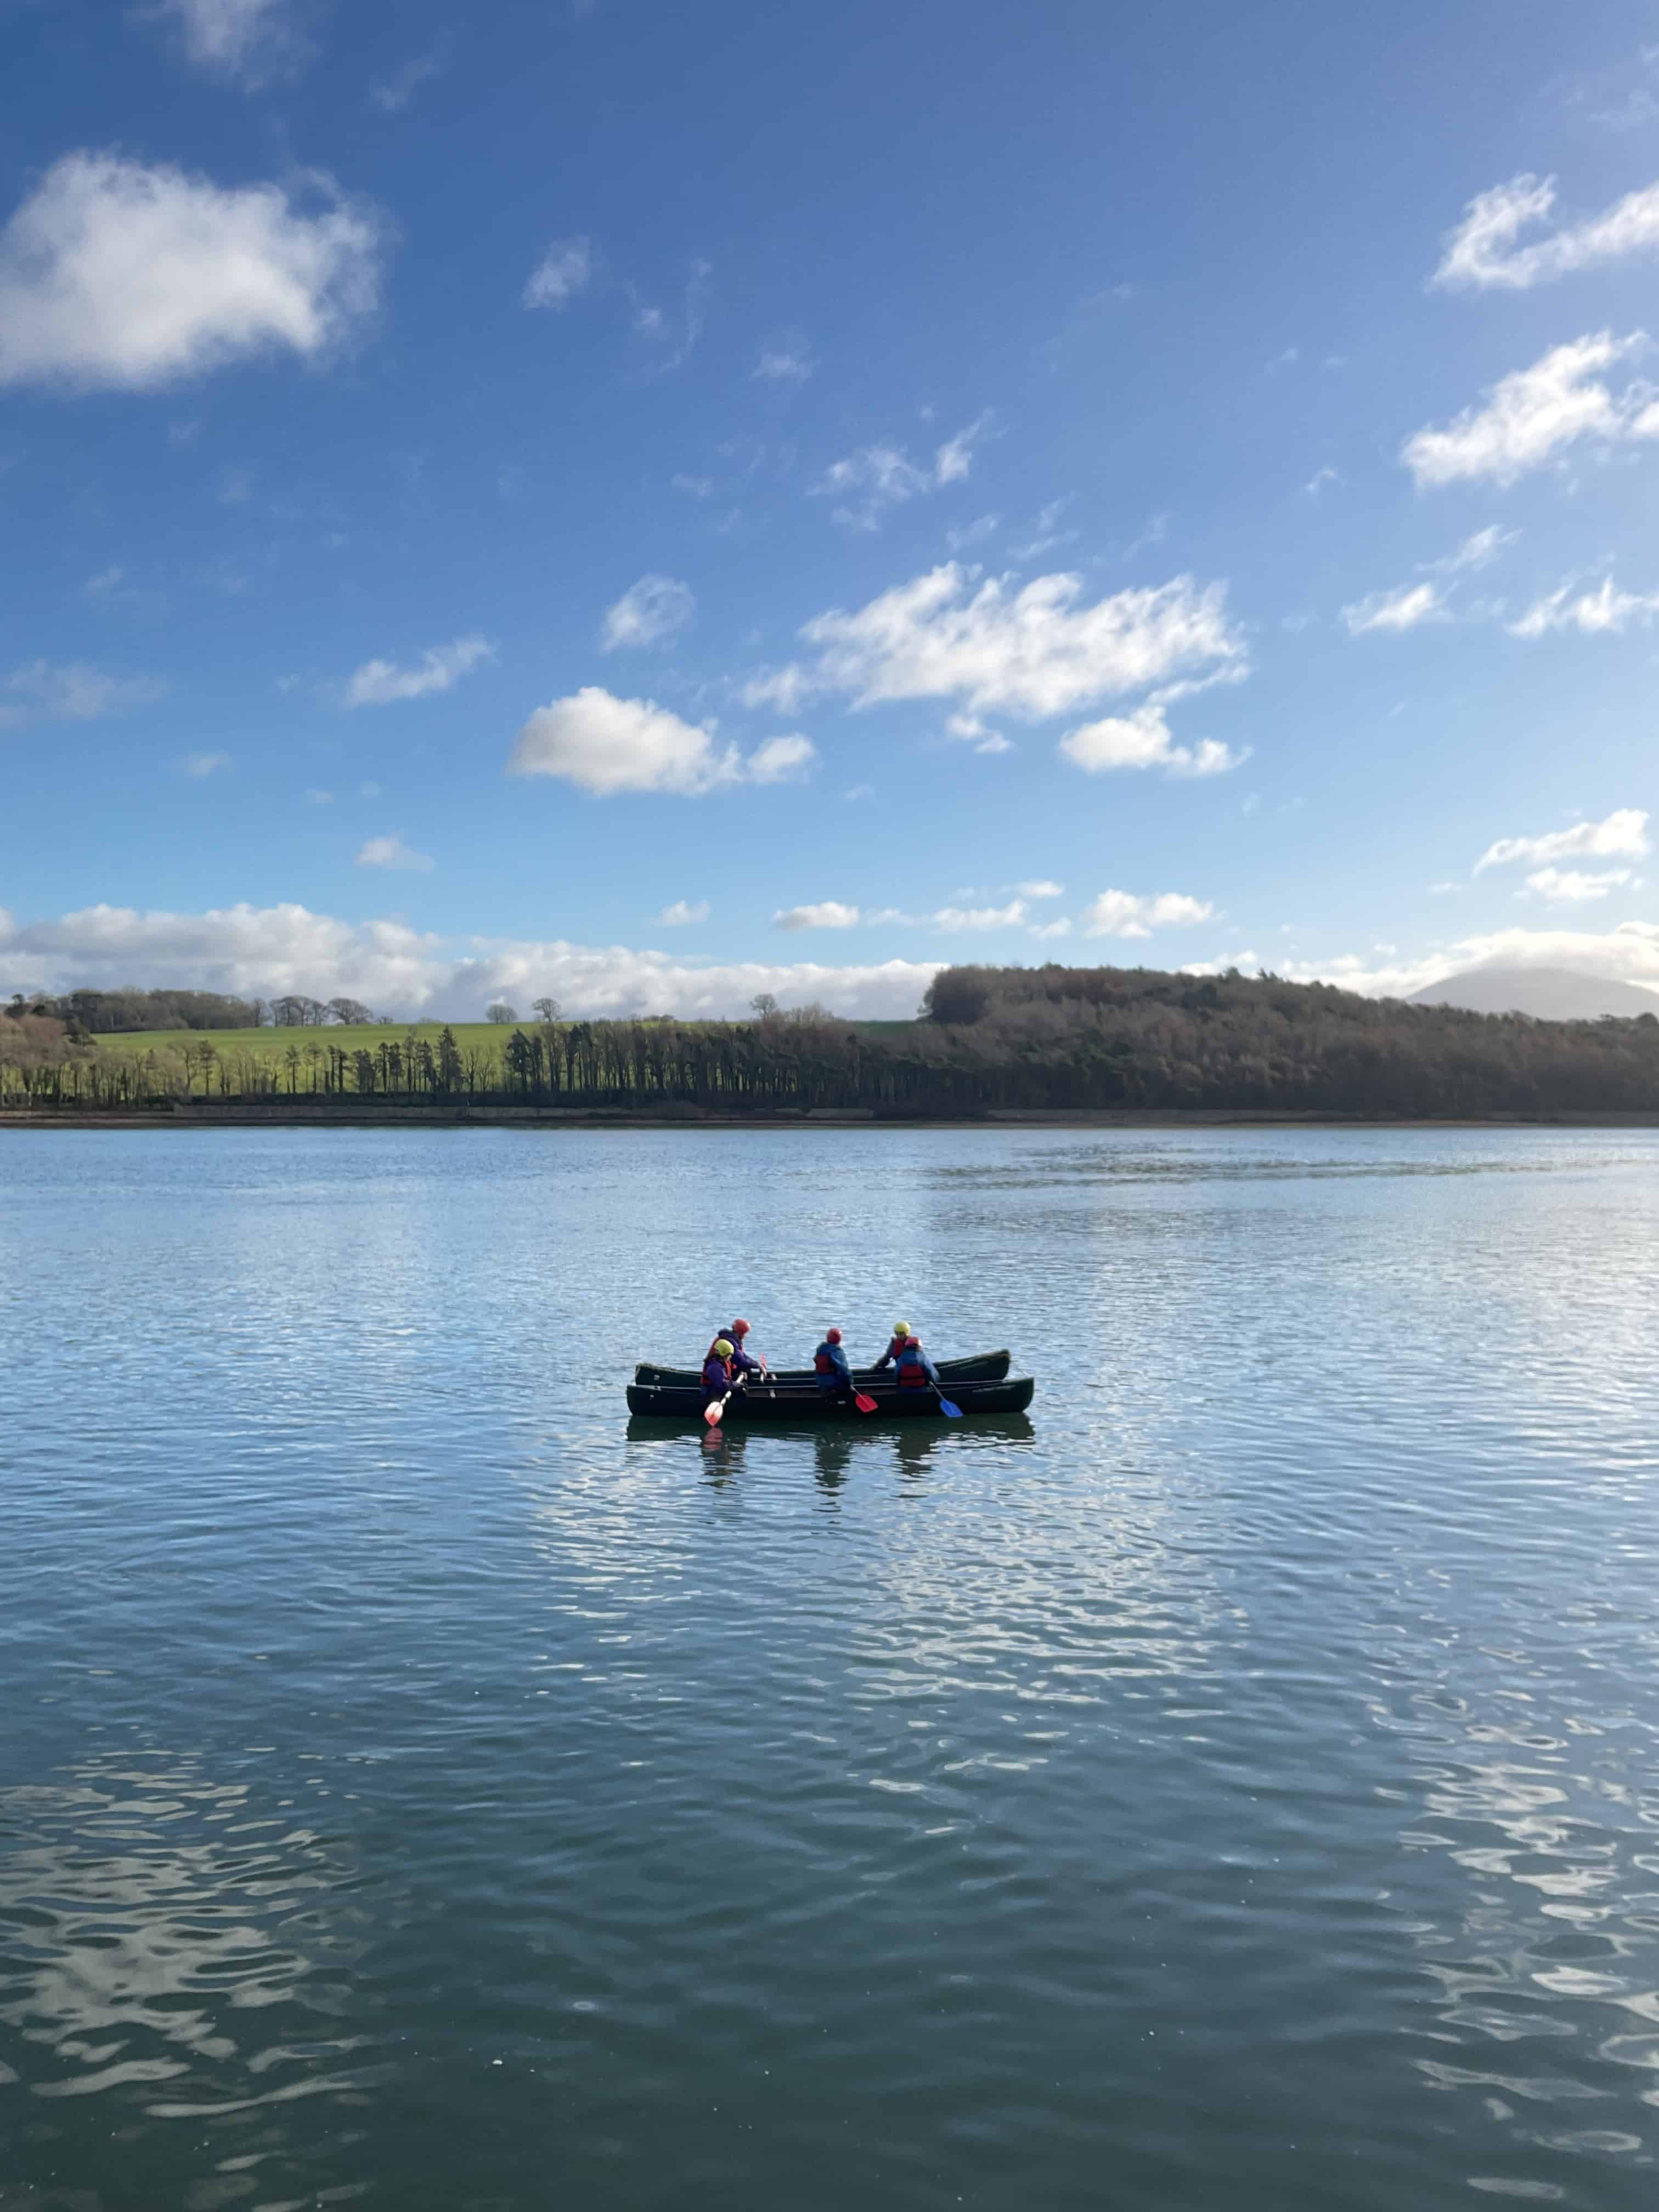 Students from Priestnall School navigate a canoe on Menai Strait during their visit to the Conway Centre in Anglesey.